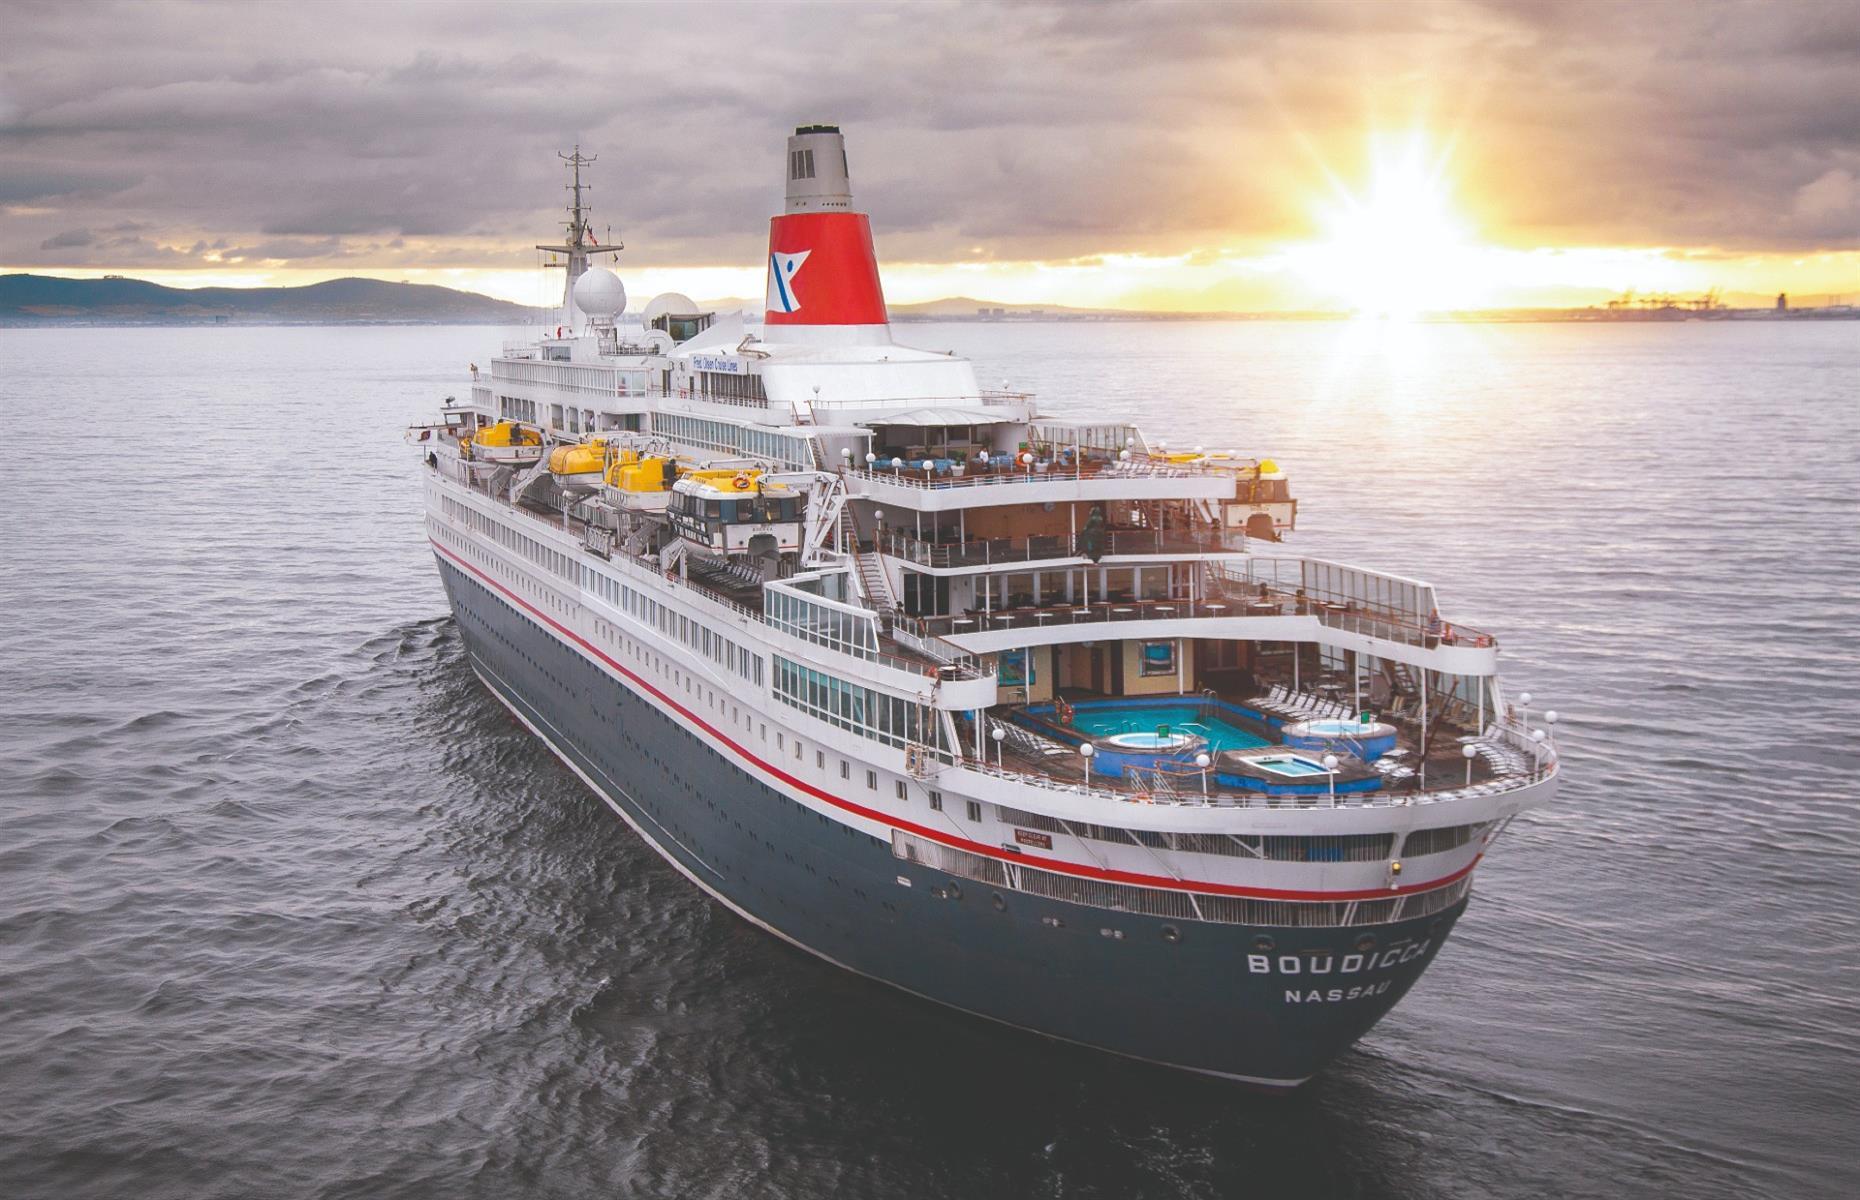 <p>The cruise industry navigated some very choppy waters during and immediately after the COVID-19 pandemic. While many have drifted back out to sea, some of our most-loved ships have been taken out of service, sold or scrapped entirely. Is your favourite among our list?</p>  <p><strong>Read on to discover the once-beloved cruise ships that are no longer sailing...</strong></p>